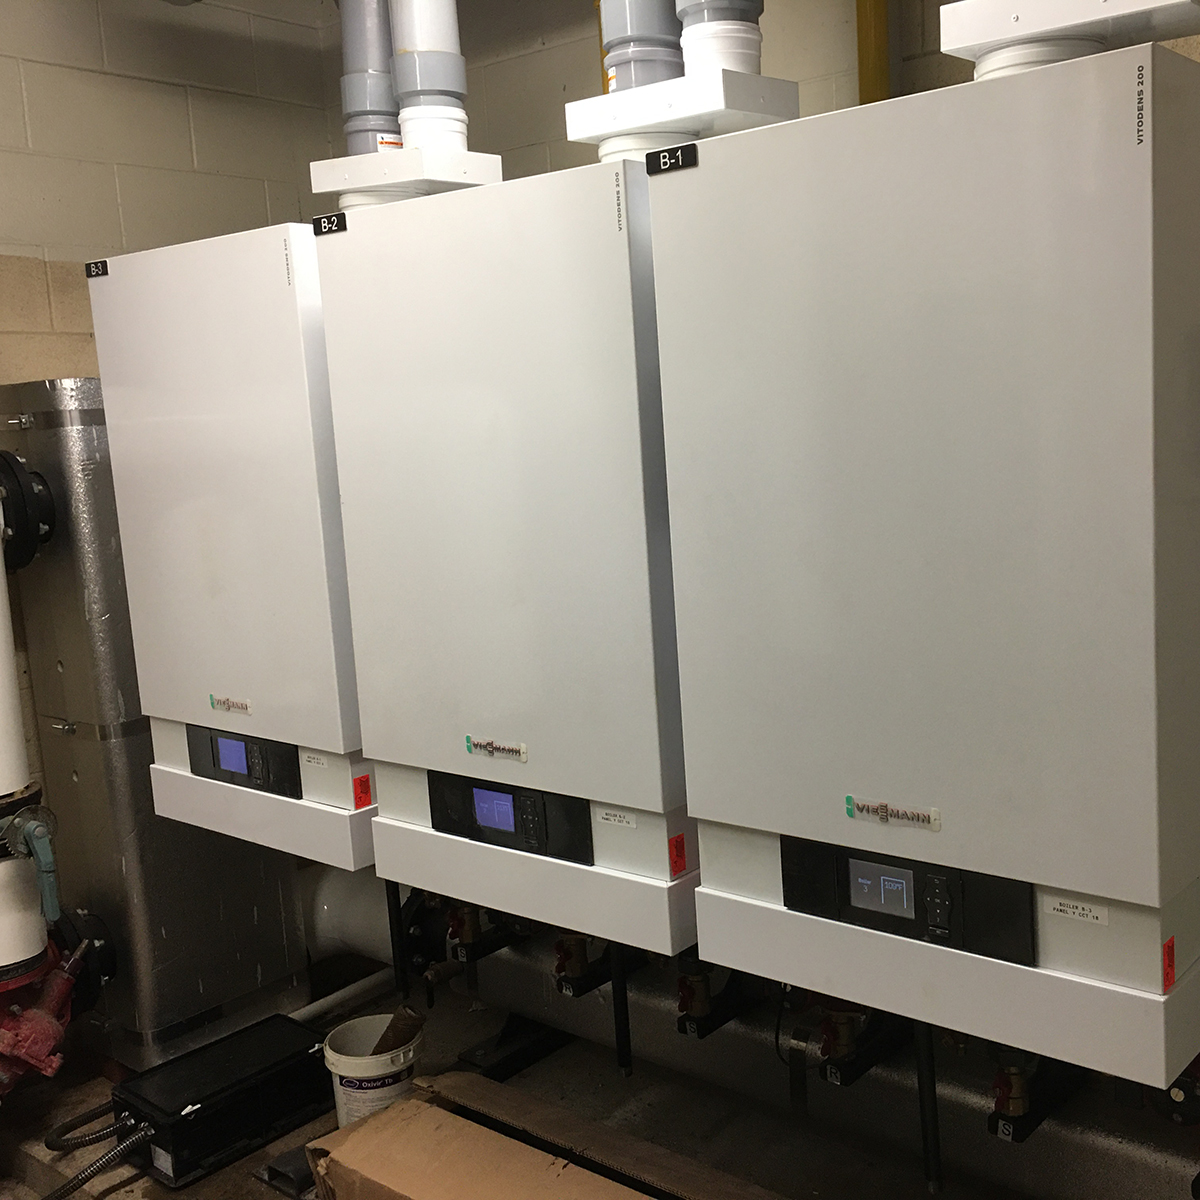 New Boilers at Cent. Hylands ES